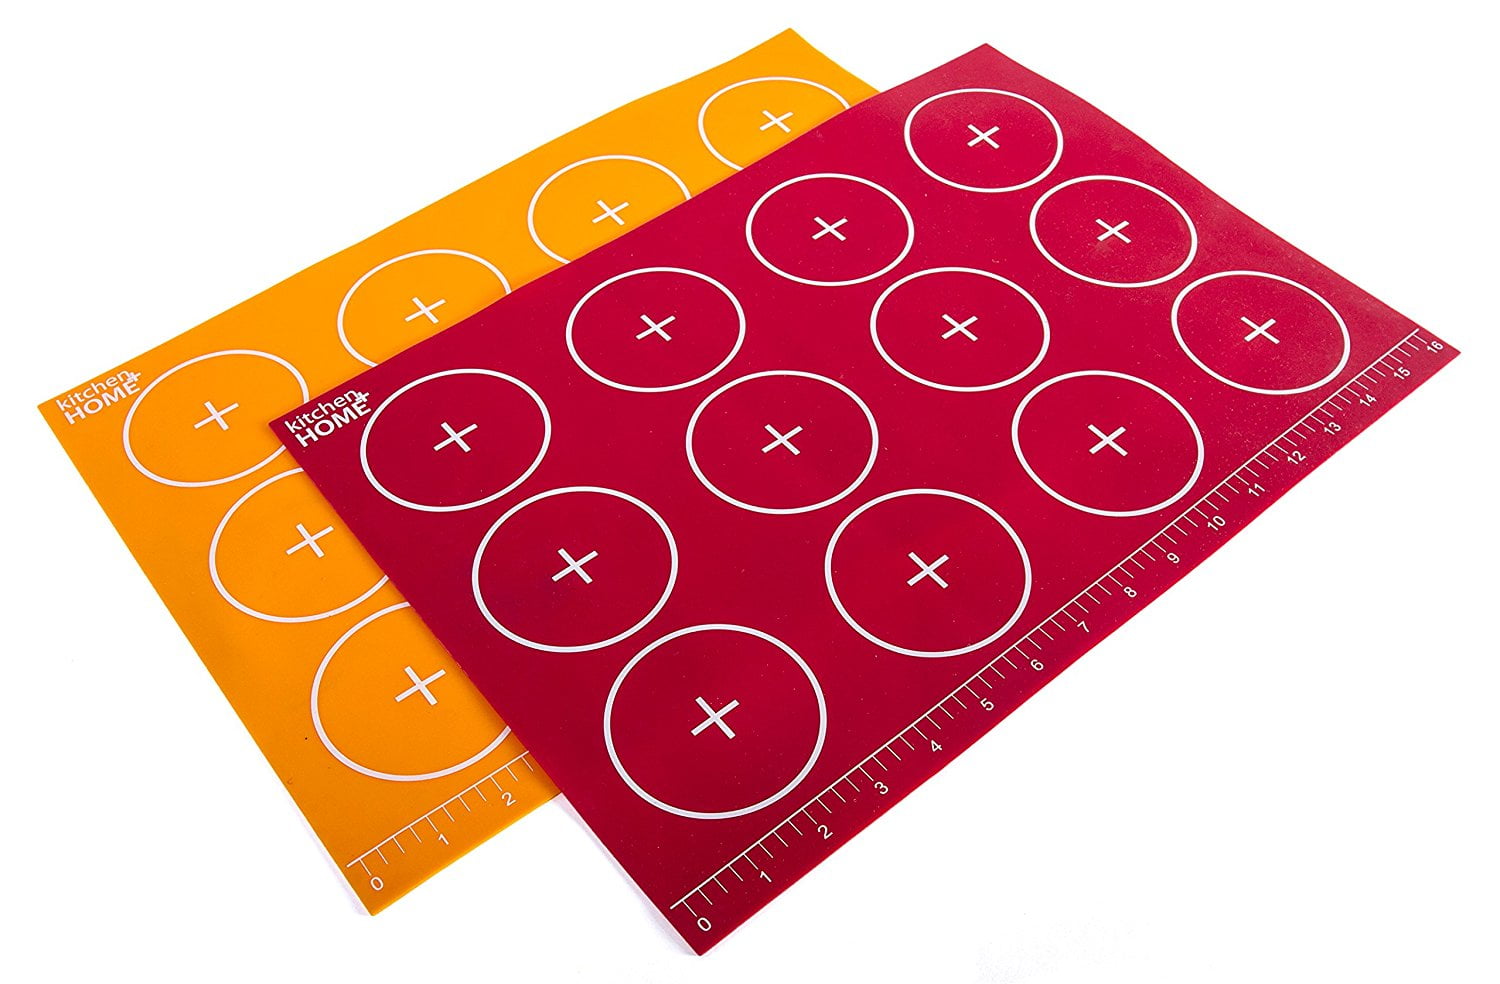 The Top Silicone Baking Mats of 2020 Reviewed